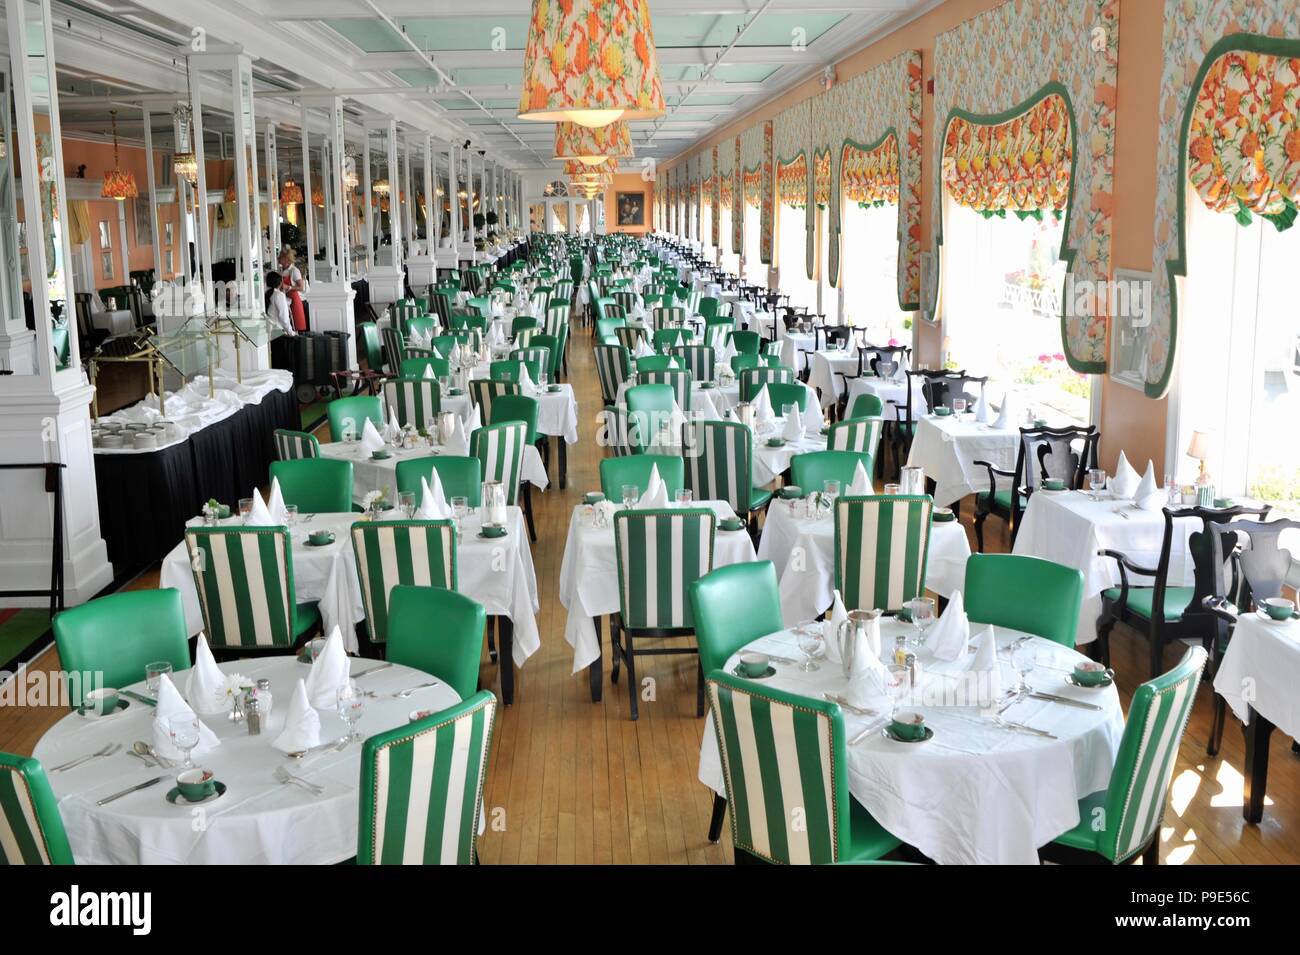 Main Dining Room With Cloth Linens And Napkins At The Historic Grand Hotel On Resort Island And State Park Of Mackinac Island Michigan Usa Stock Photo Alamy